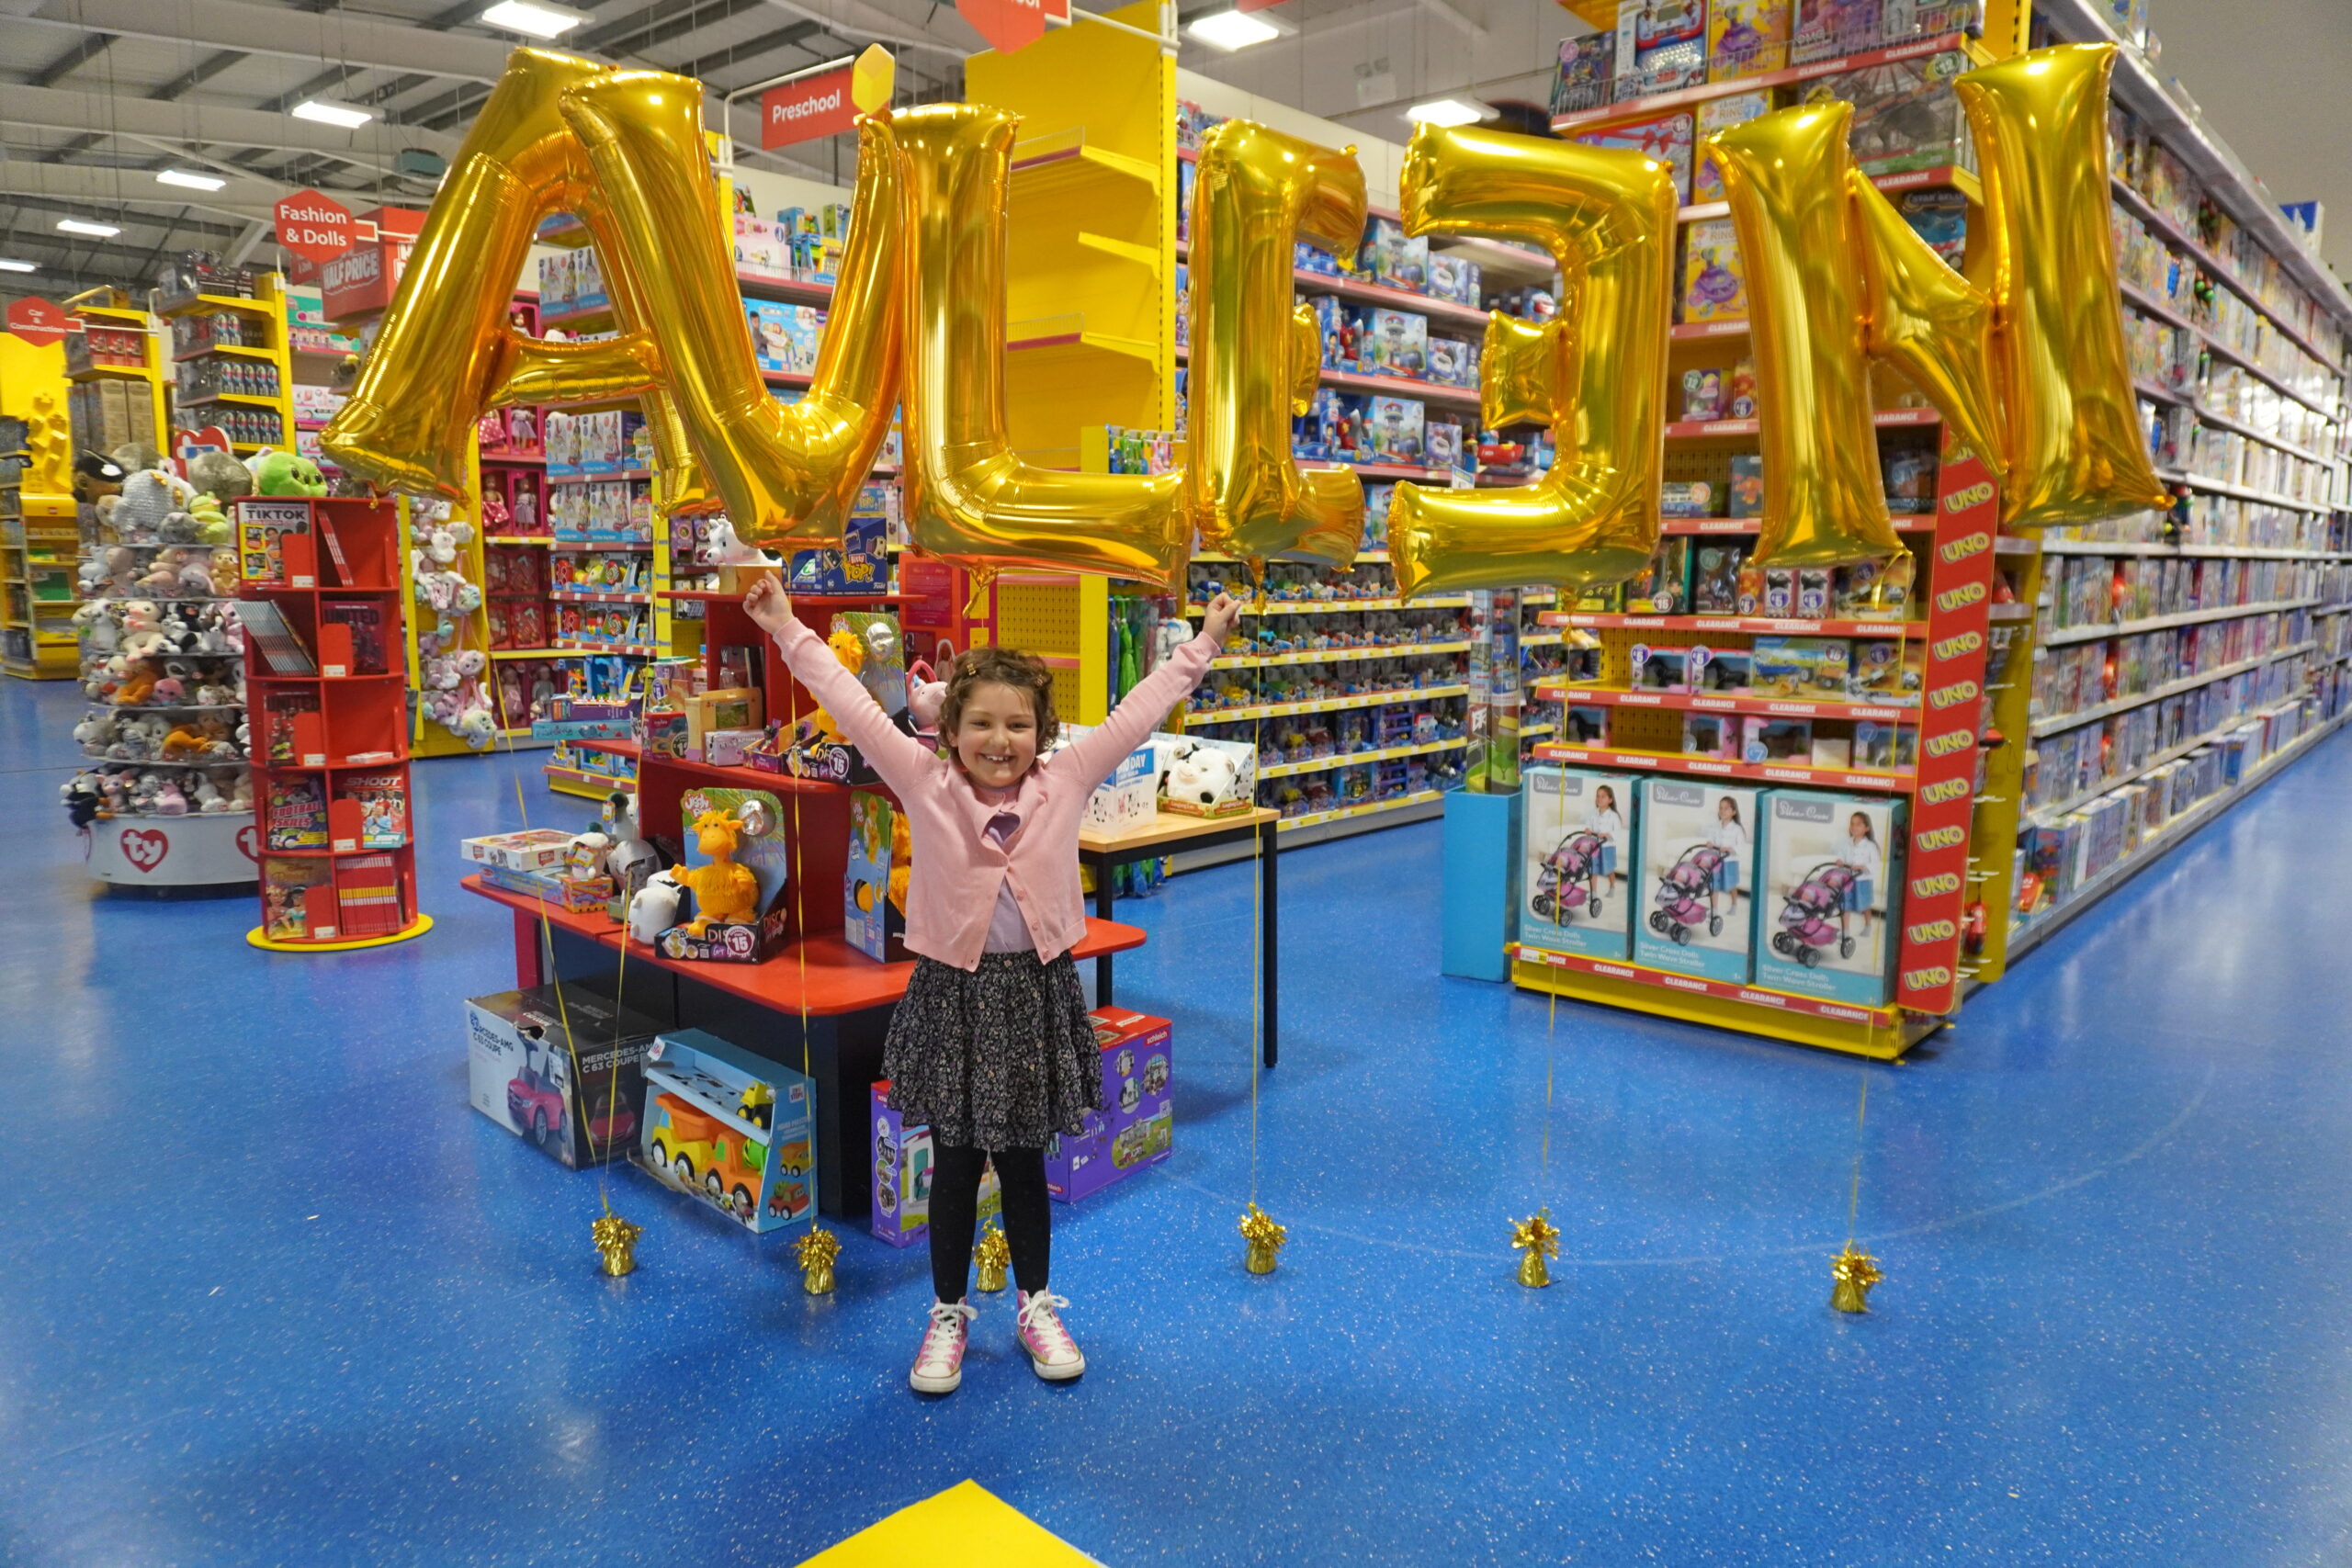 Little girl in a toy shop. There are balloons behind her which spell out AVLEEN. She is wearing a pink cardigan and is holding her arms up